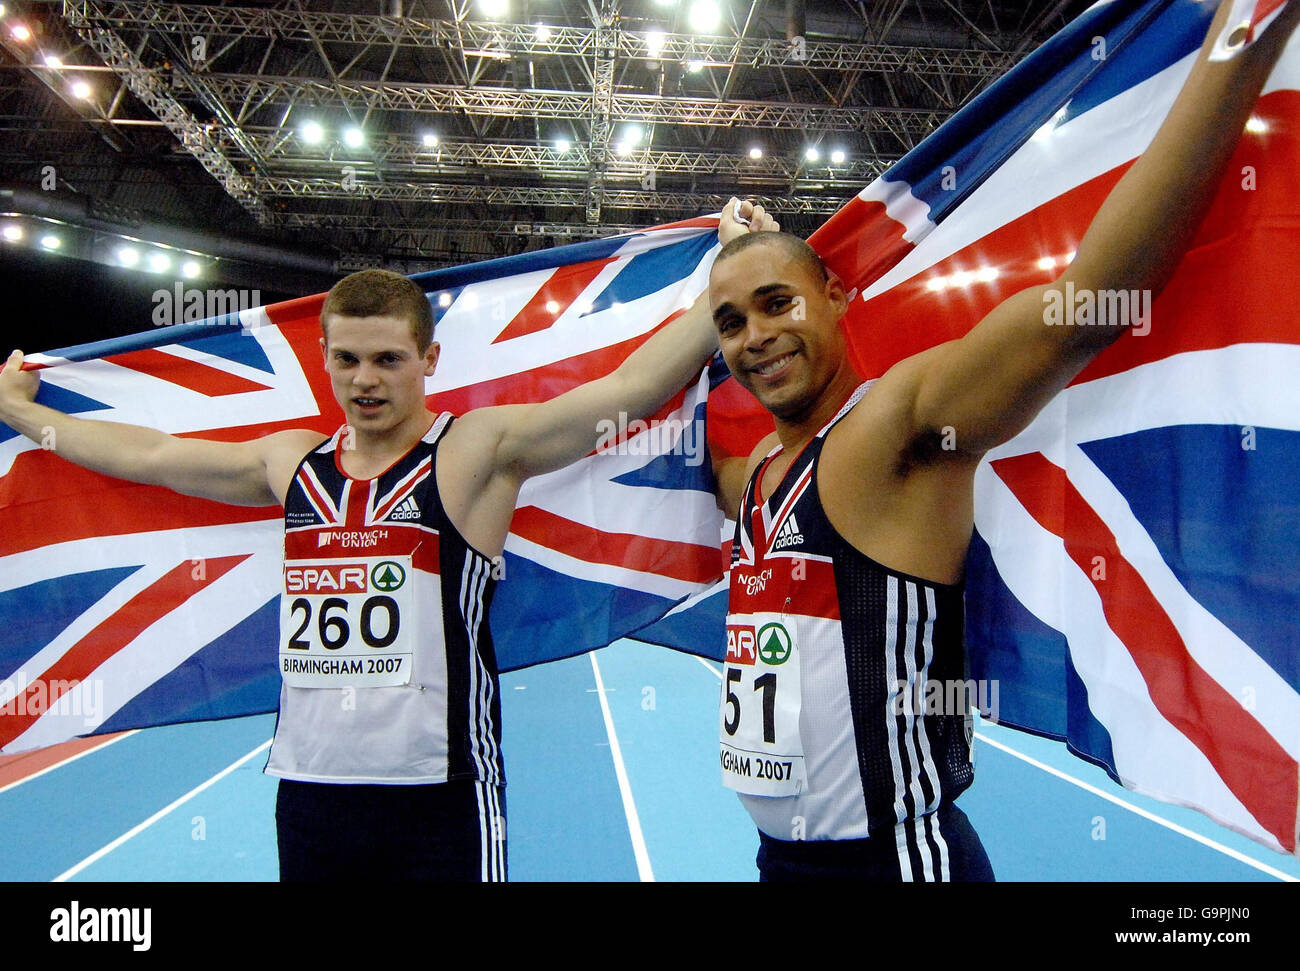 Great Britain's Jason Gardener (right) celebrates after taking first place in the 60m relay, as teammate Craig Pickering celebrates second place during the European Athletics Indoor Championships at the National Indoor Arena, Birmingham. Stock Photo